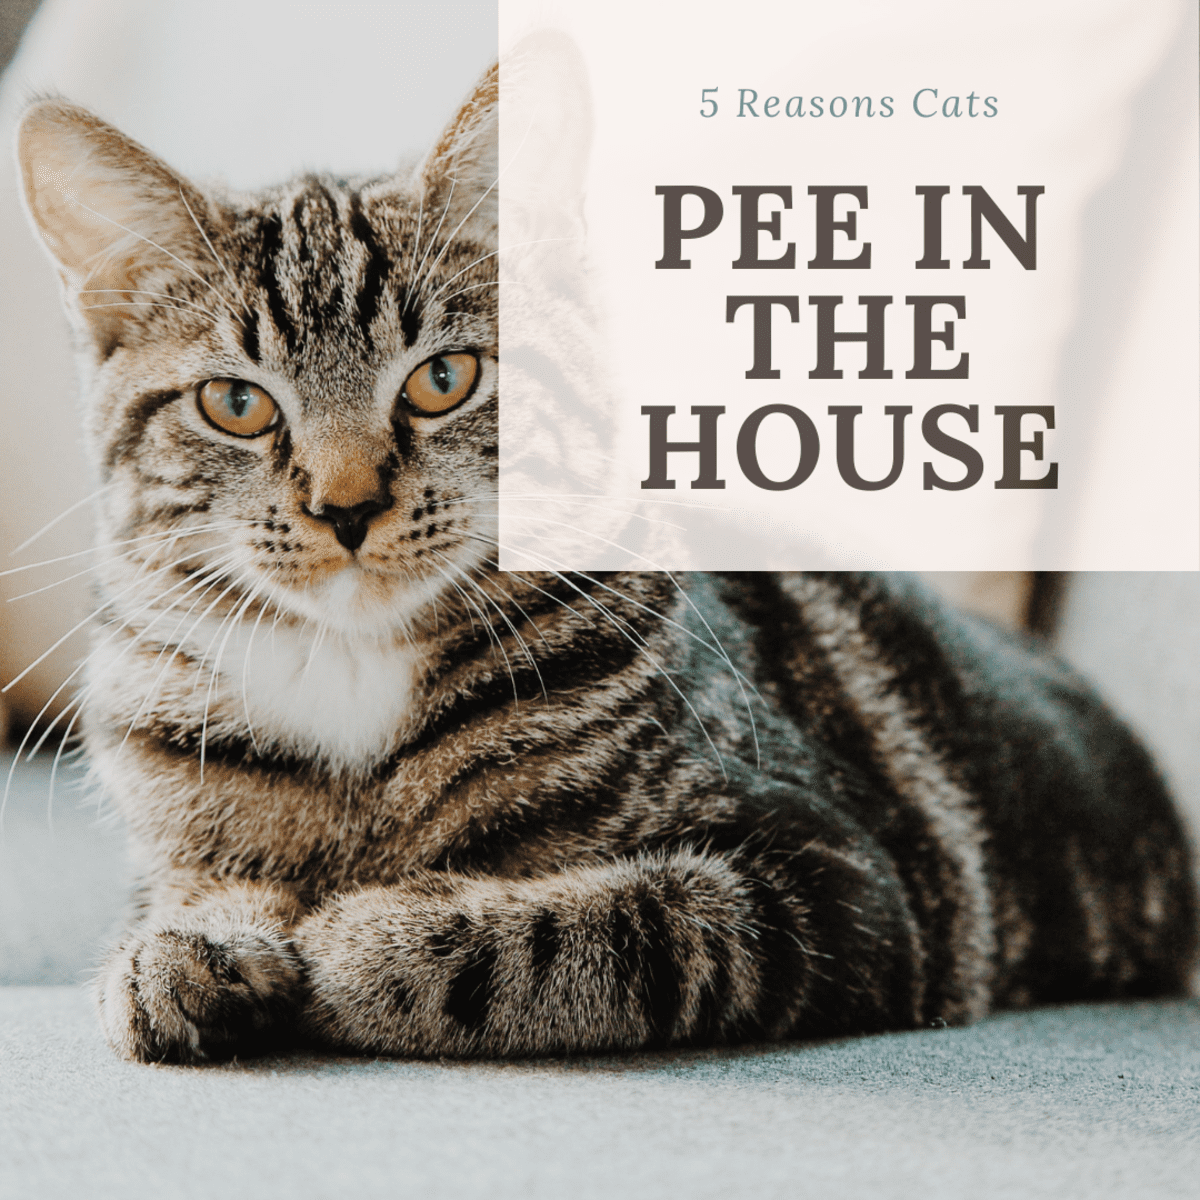 How To Get Your Cat To Pee Why Do Cats Pee in the House? Top Five Reasons - PetHelpful